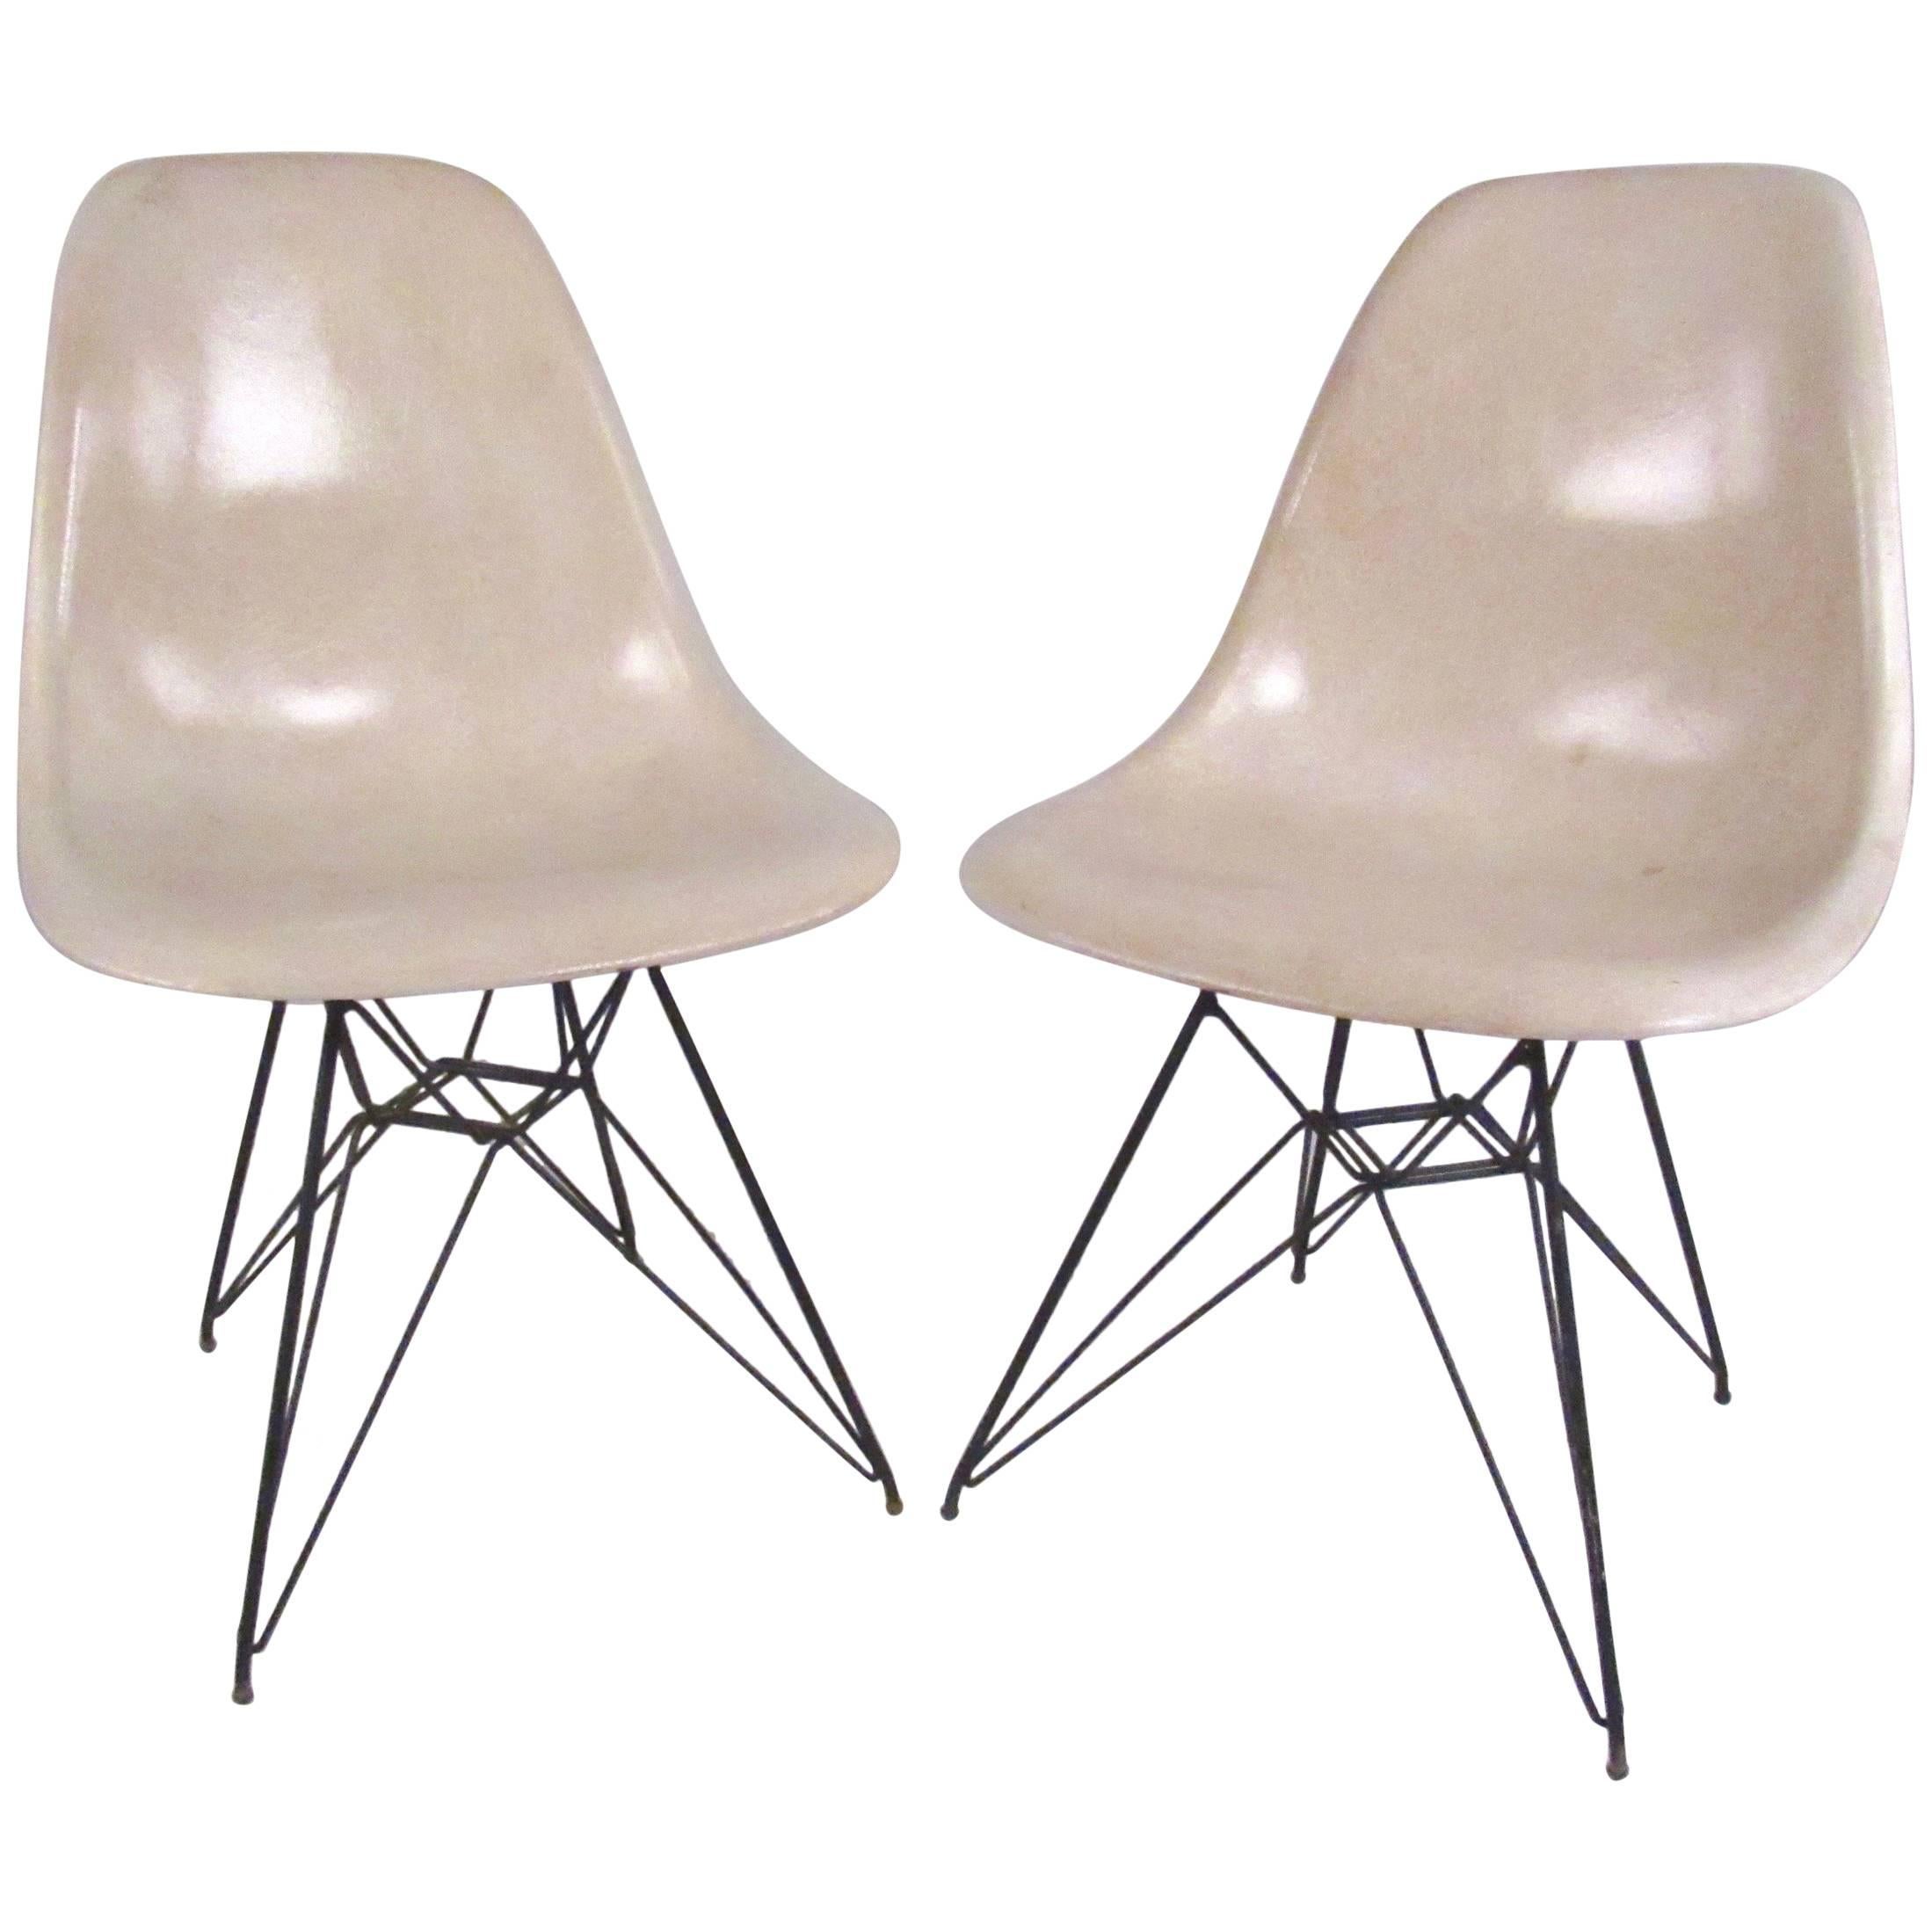 Vintage Charles Eames Eiffel Tower Fiberglass Side Chairs for Herman Miller